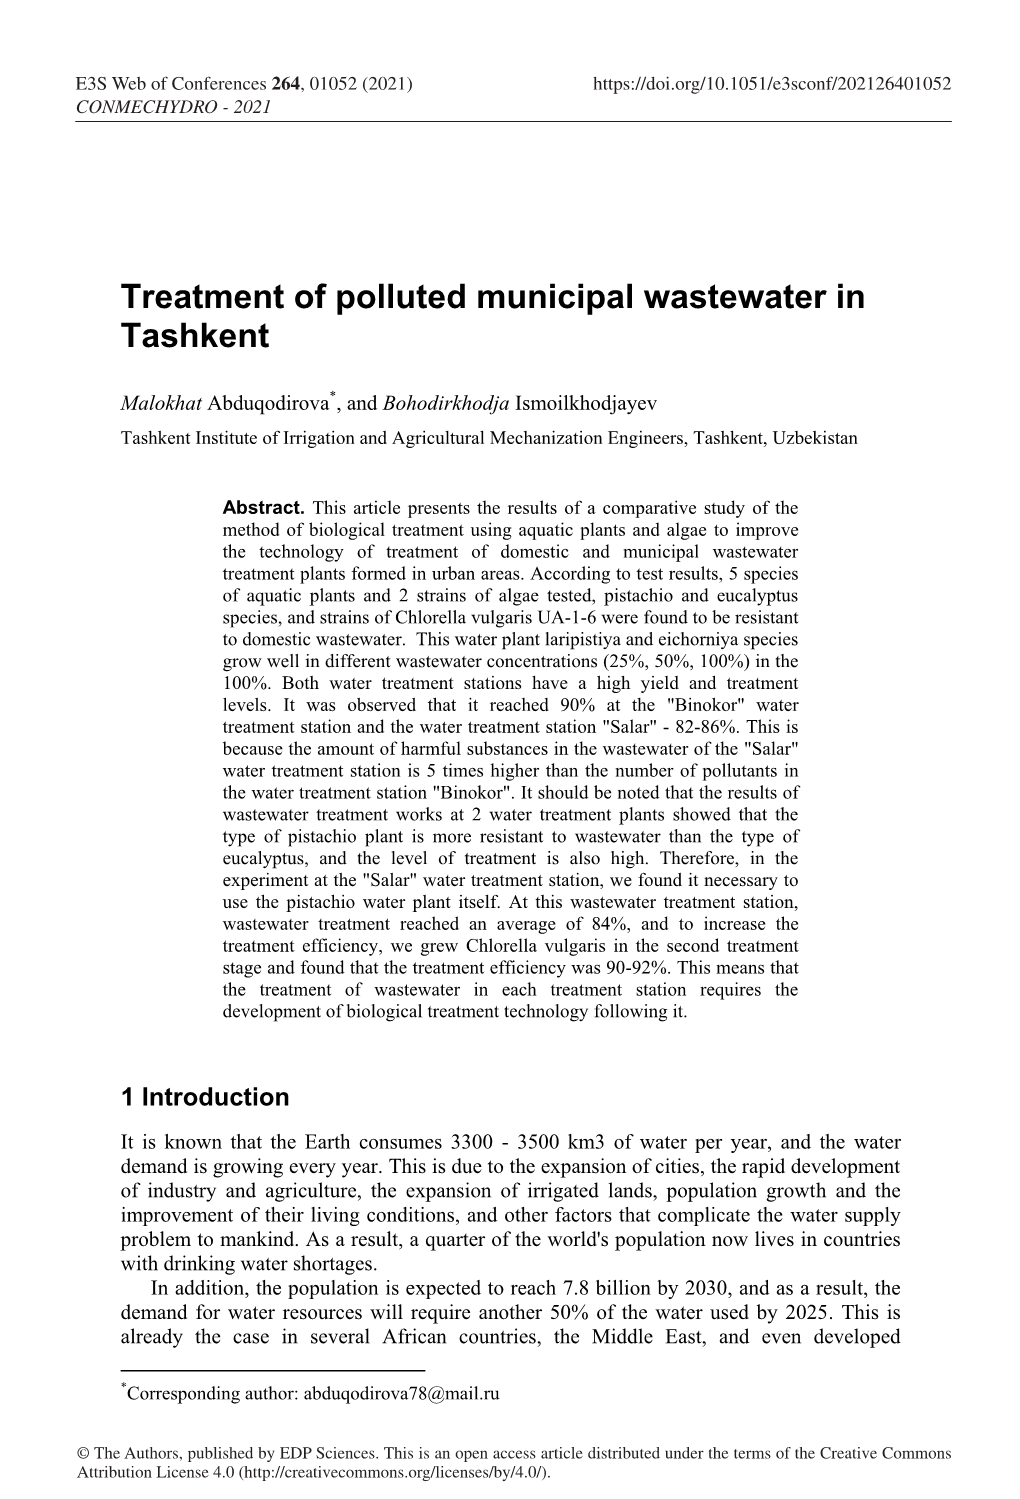 Treatment of Polluted Municipal Wastewater in Tashkent